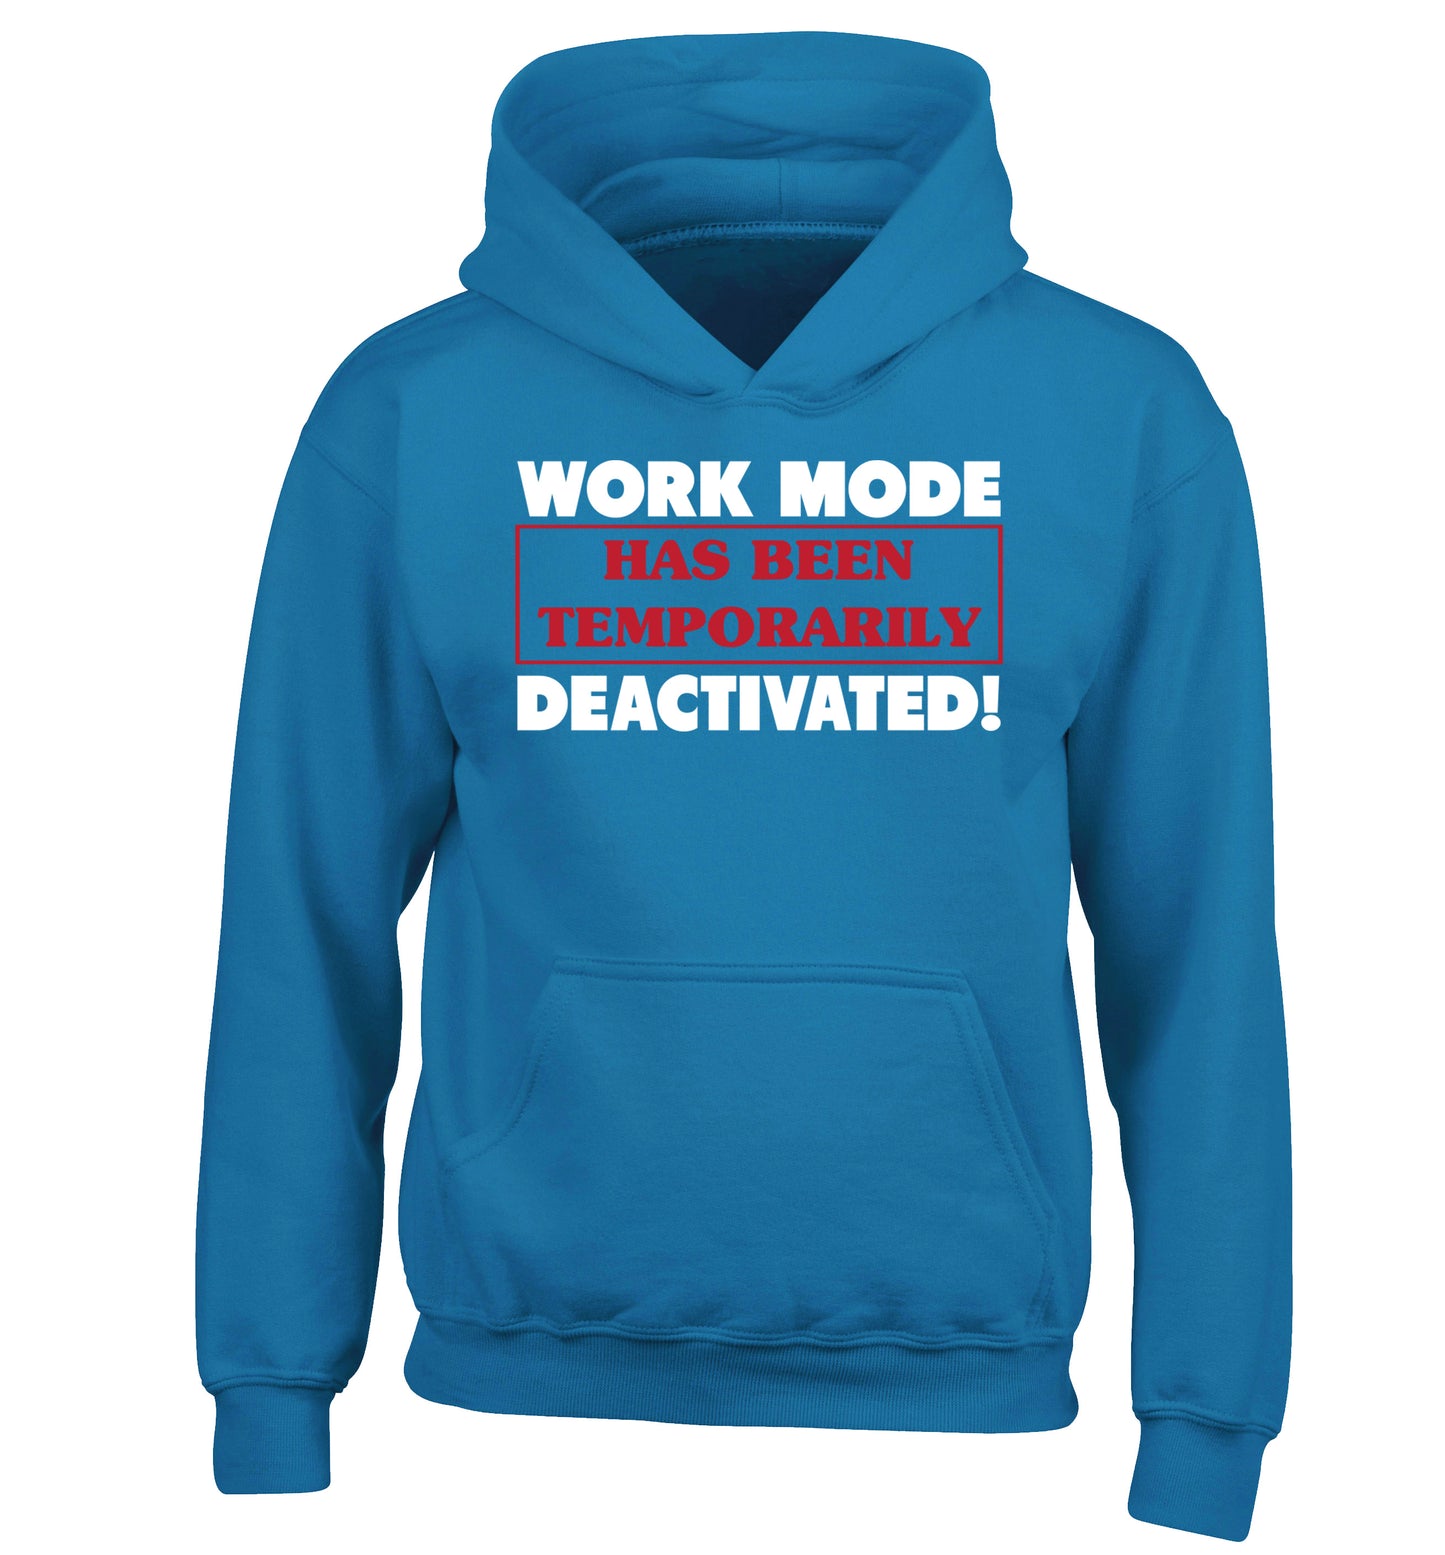 Work mode has now been temporarily deactivated children's blue hoodie 12-13 Years